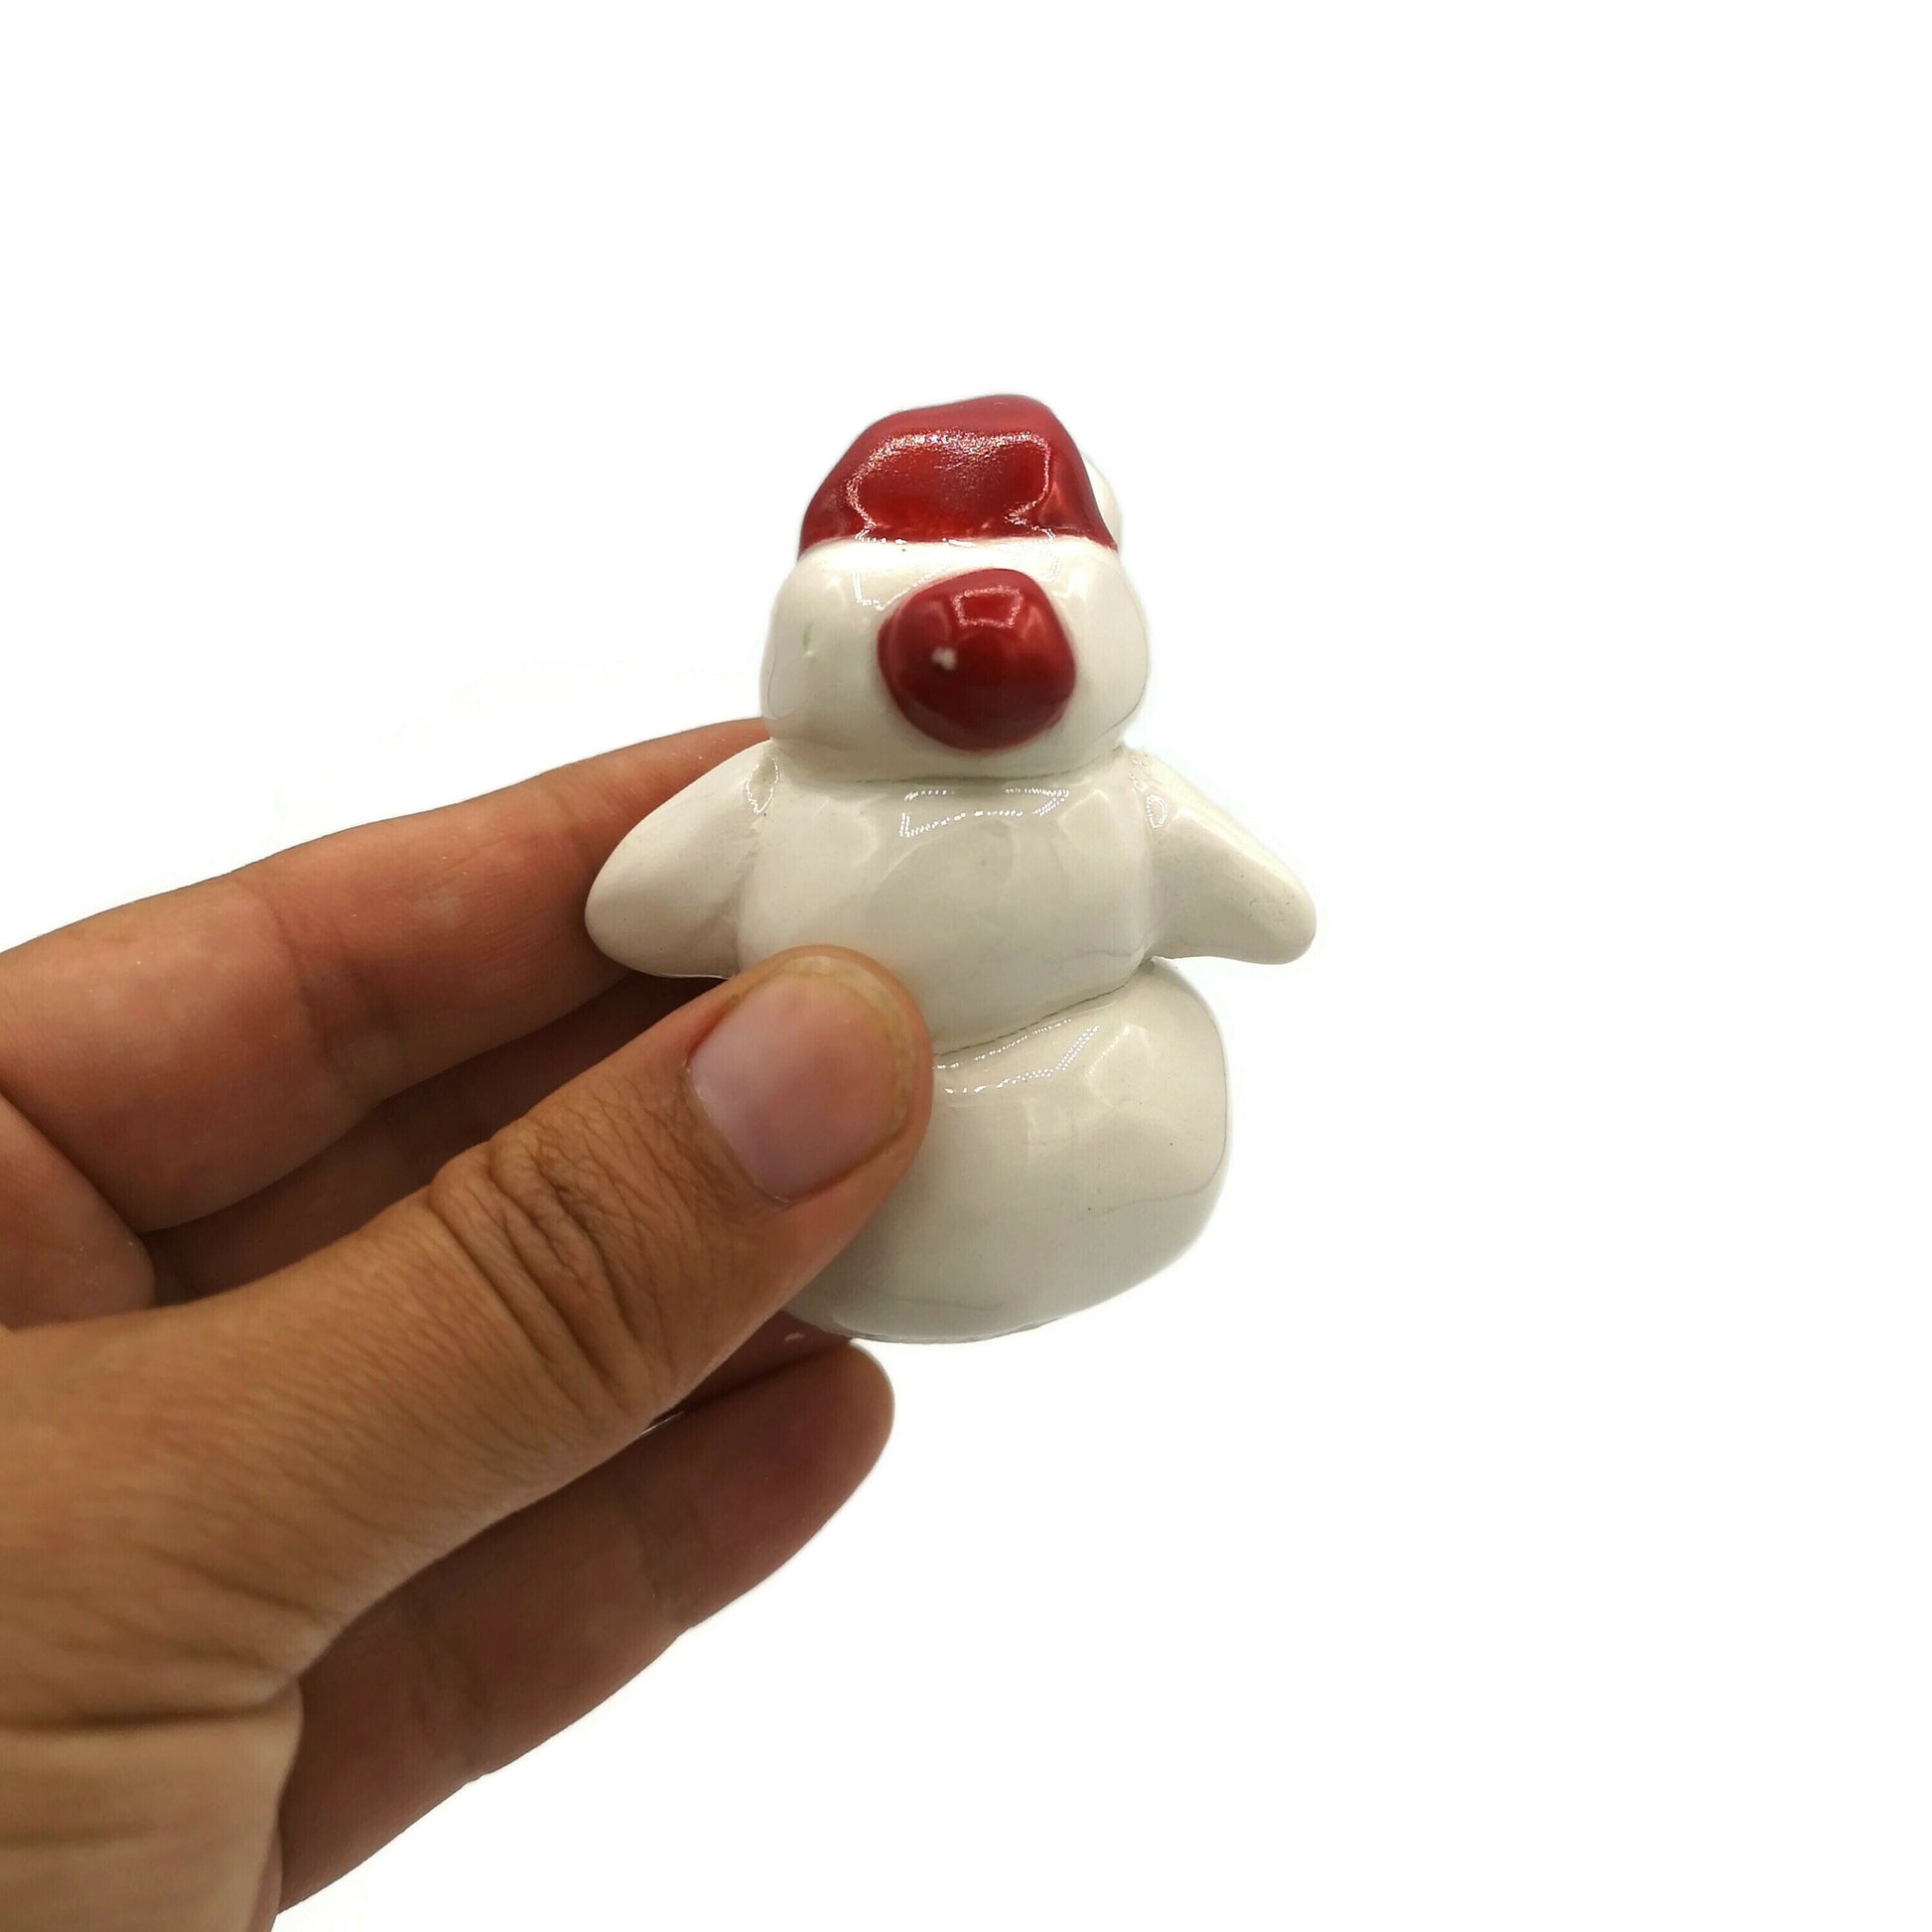 Miniature snowman ornament, Gifts For Her Christmas, ceramic snowman figurine, mom christmas gift, Clearance Items, cake topper - Ceramica Ana Rafael